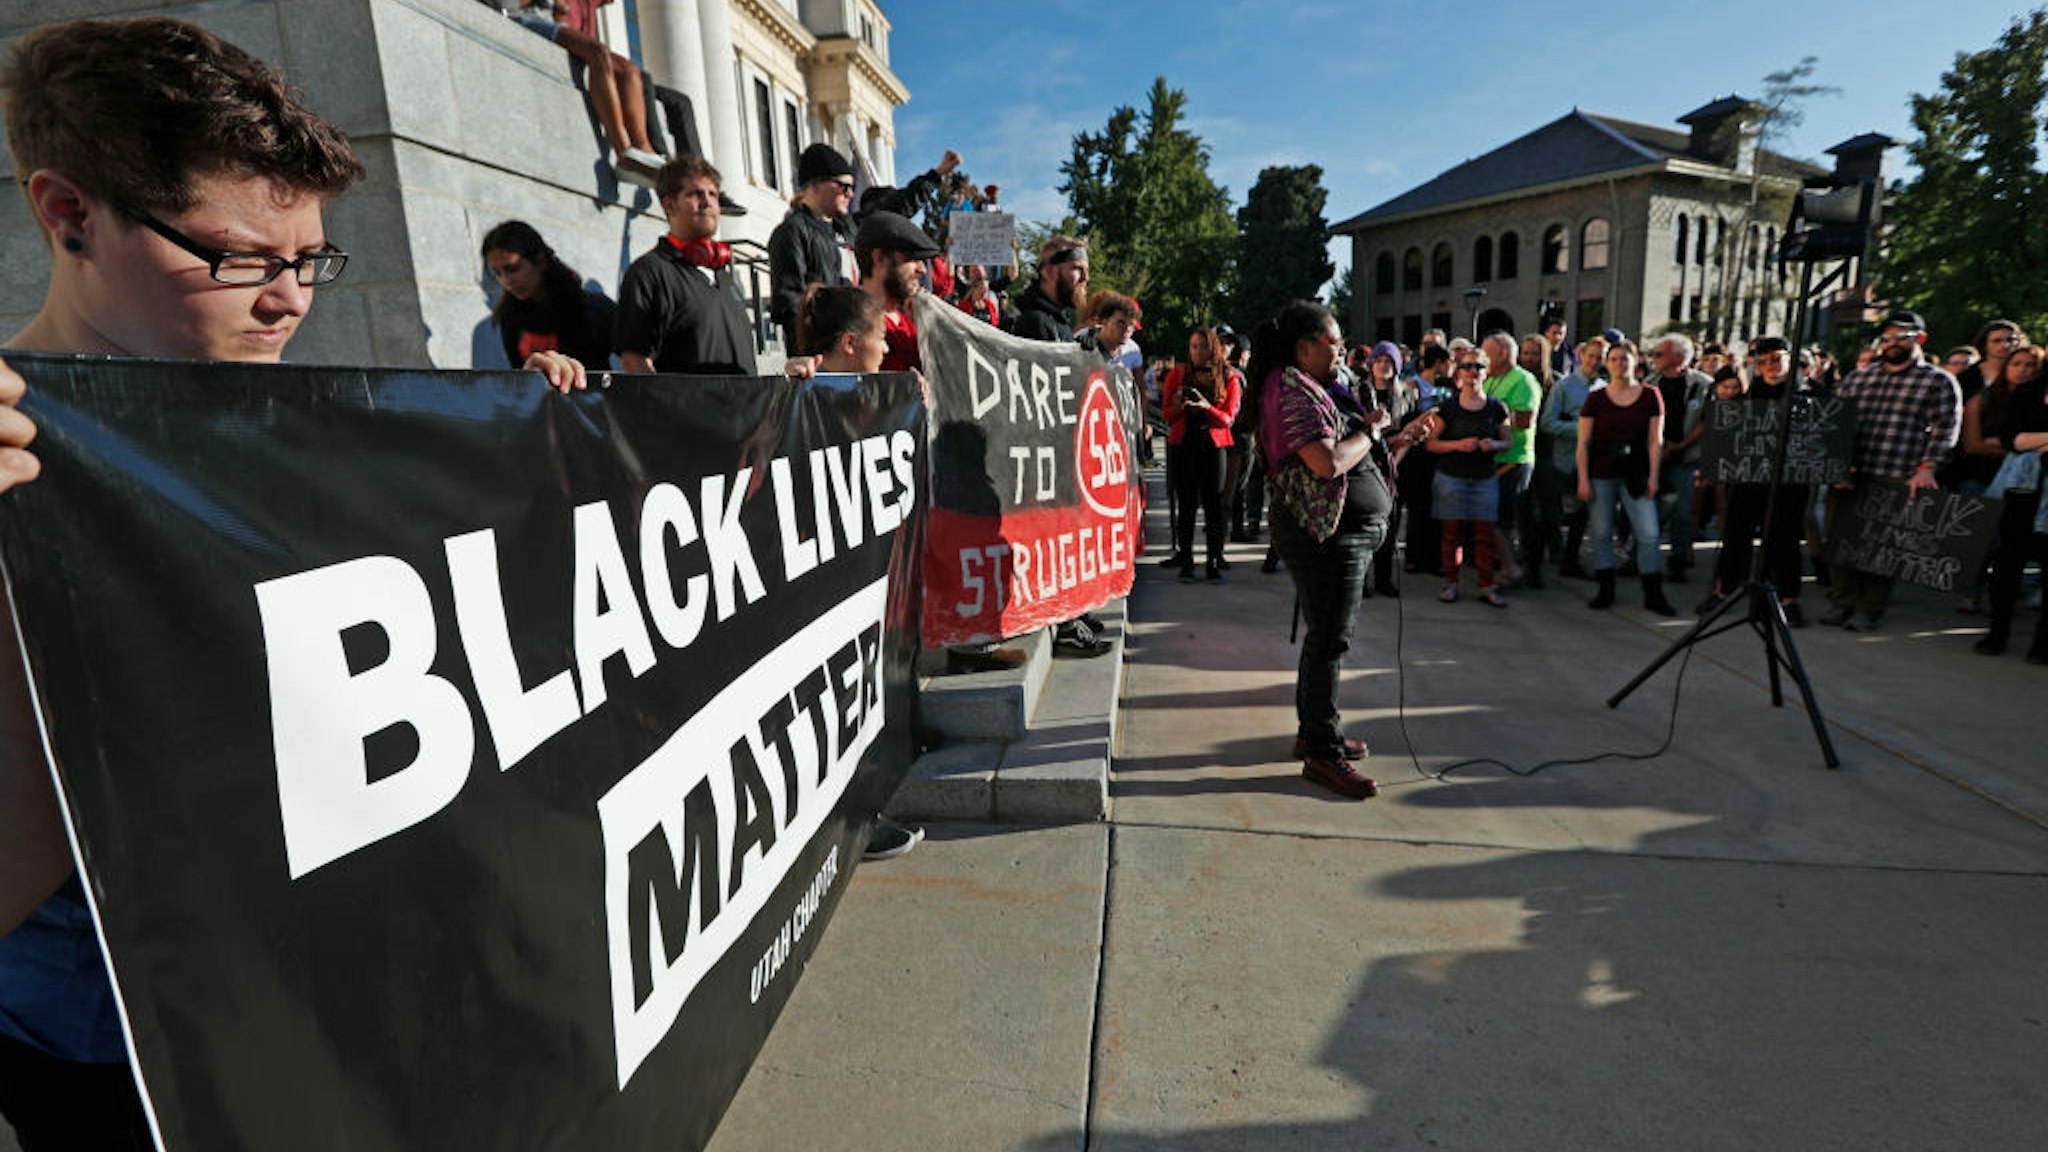 Protesters from Students For a Democratic Society and Black Lives Matter demonstrate on the University of Utah campus against an event where right wing writer and commentator Ben Shapiro is speaking on September 27, 2017 in Salt Lake City, Utah.